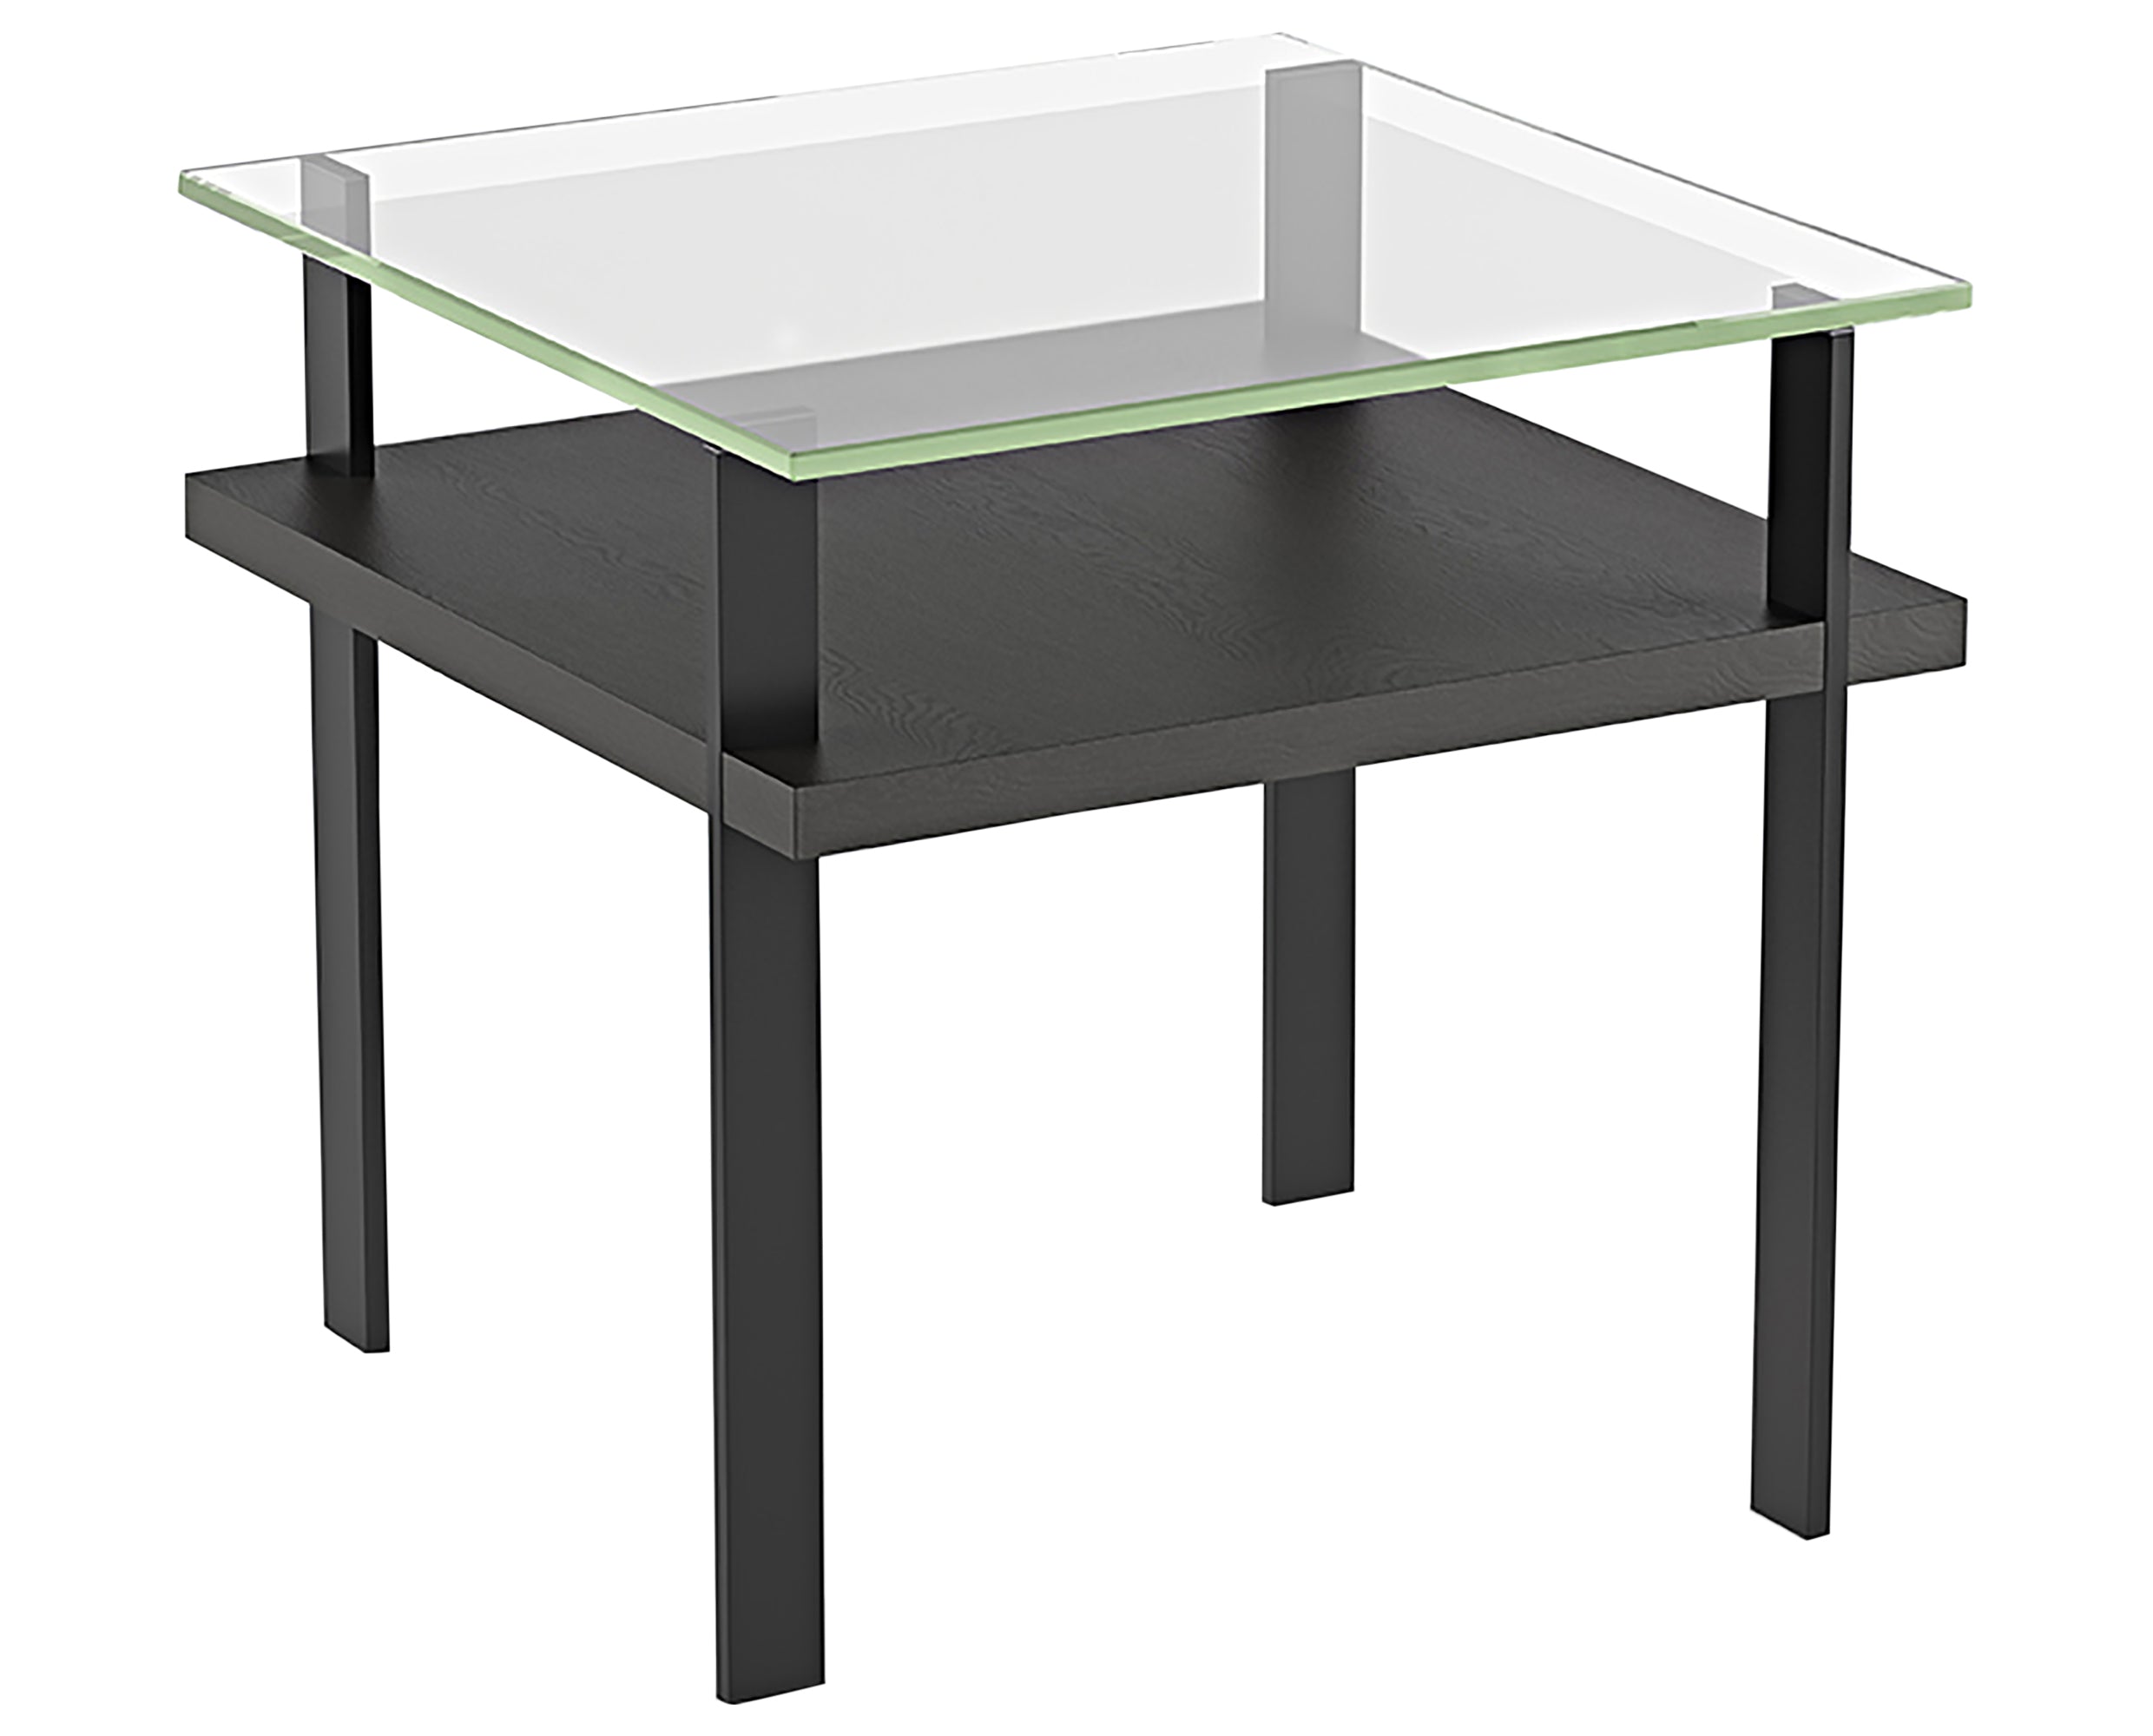 Charcoal Ash Veneer & Polished Tempered Glass with Black Aluminum | BDI Terrace End Table | Valley Ridge Furniture